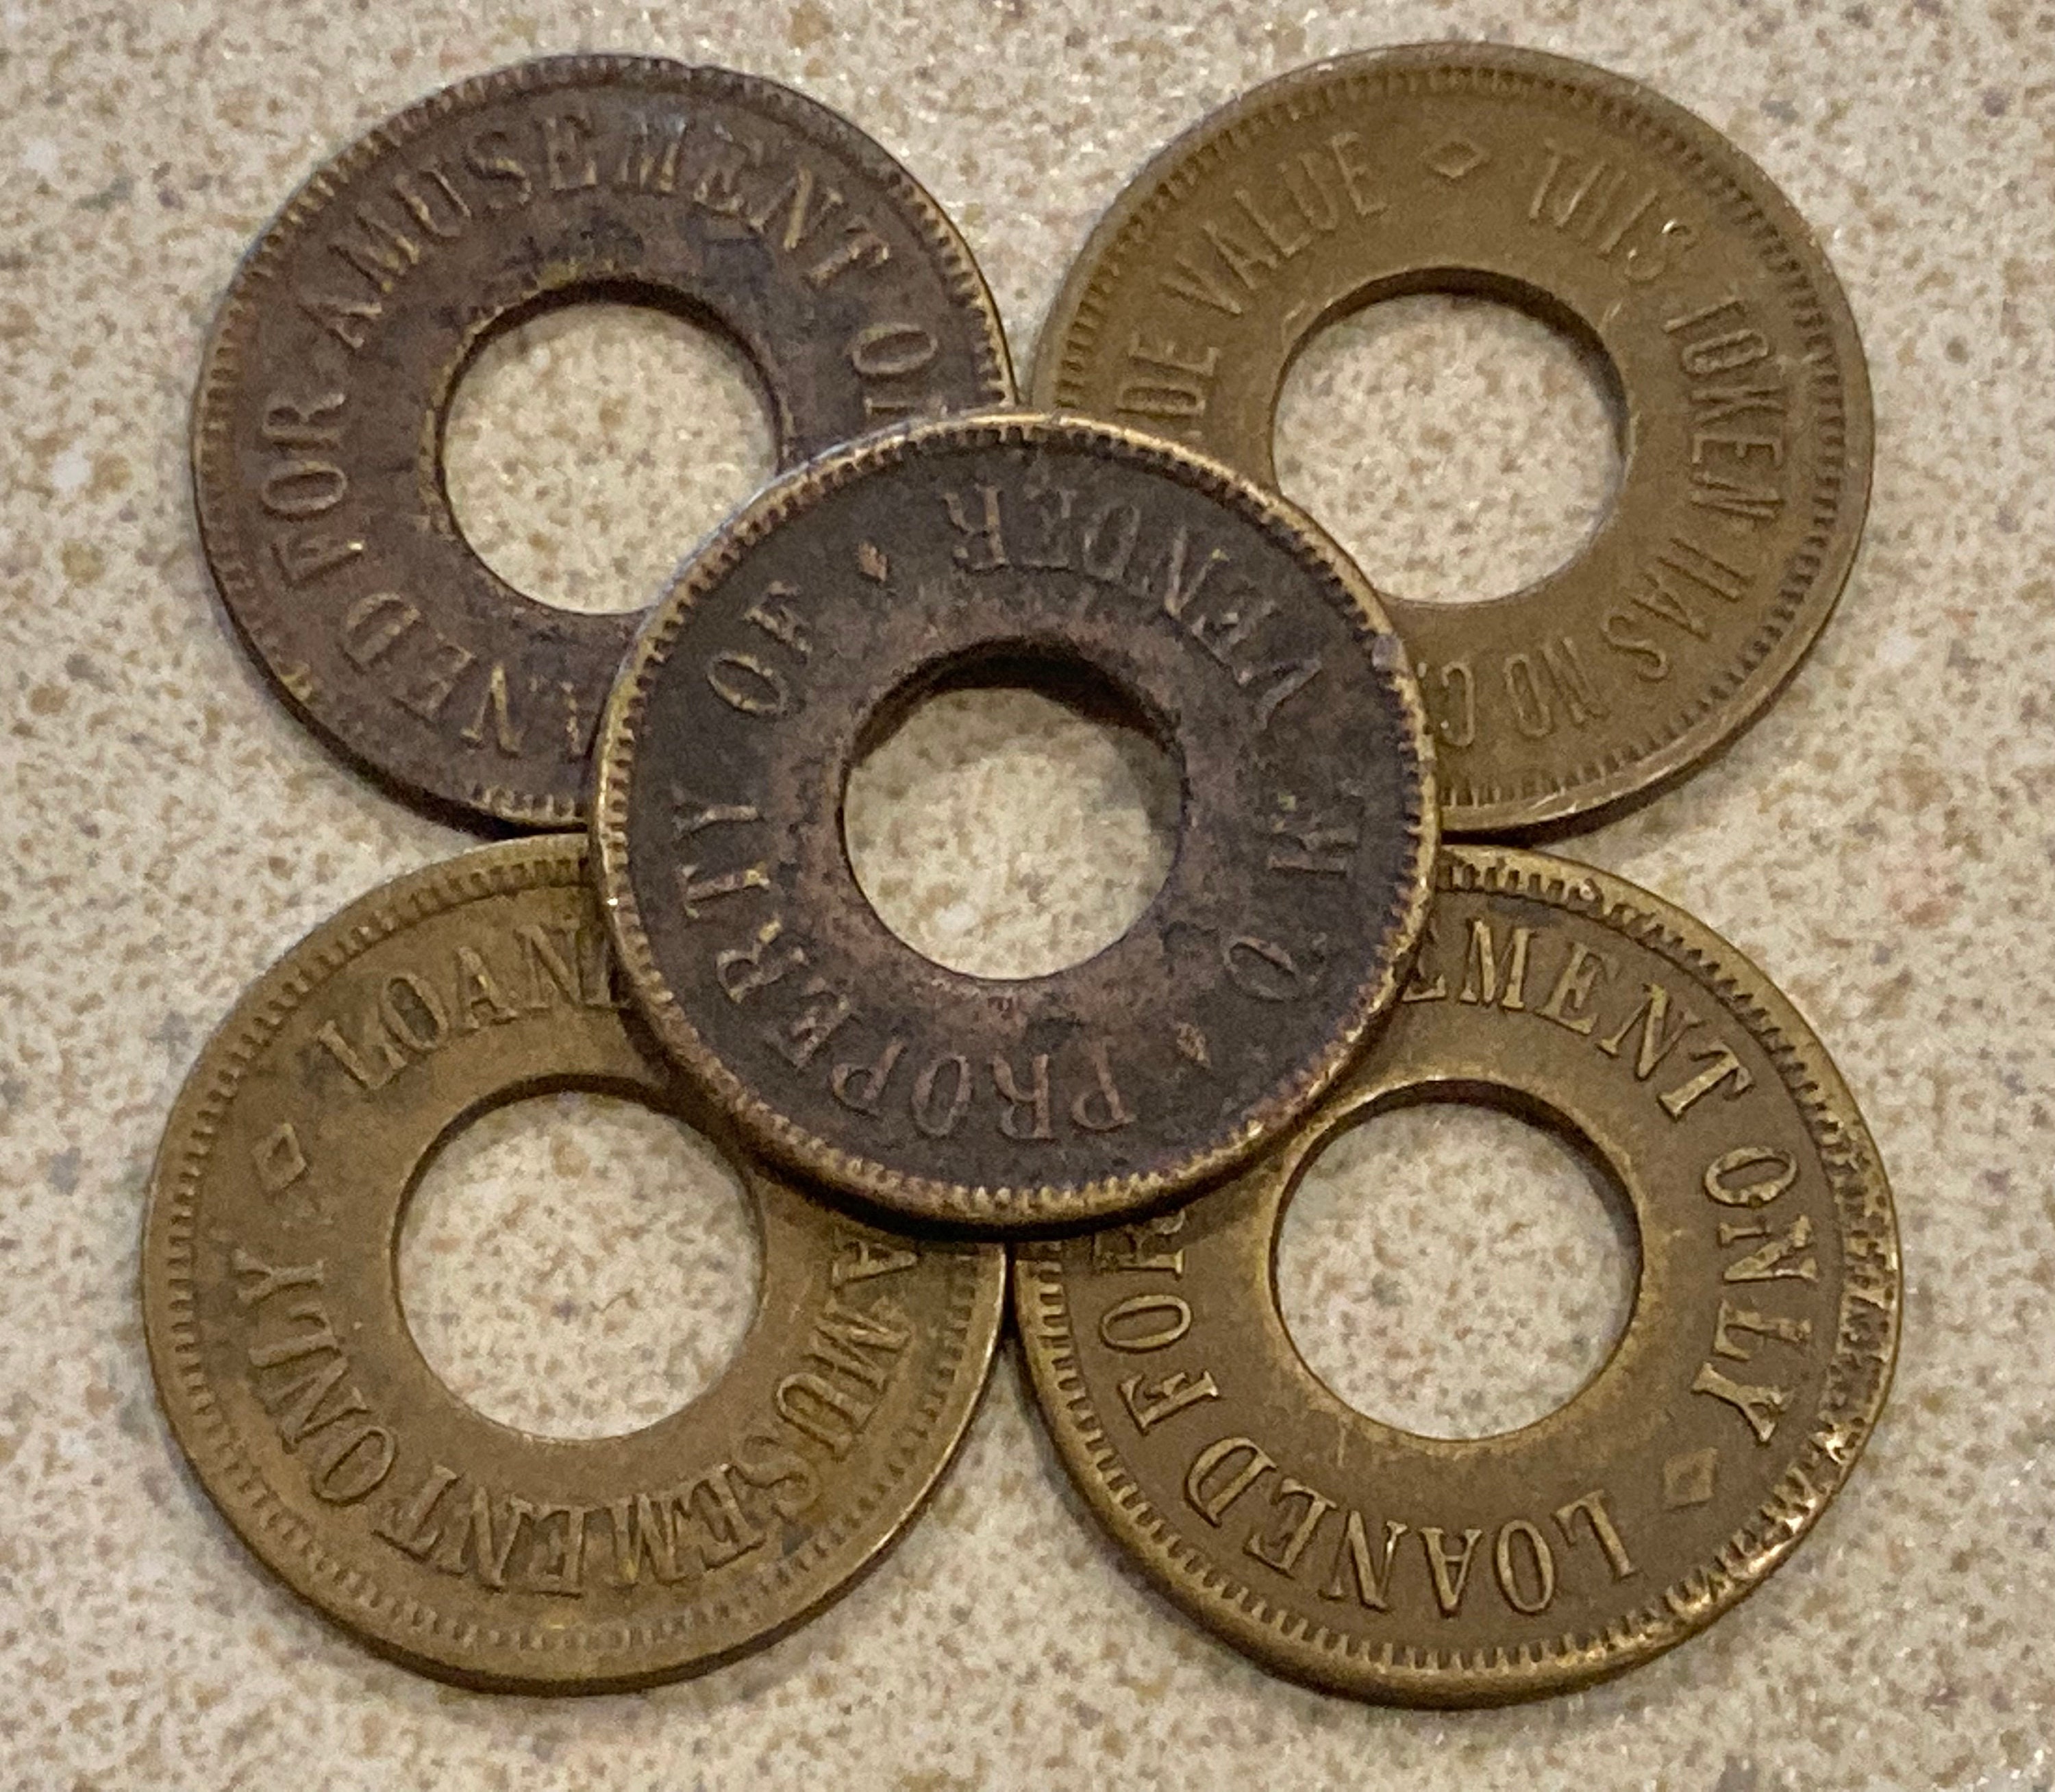 80 Antique Brass Tokens for Slots, Amusement Games, Gambling 1930s